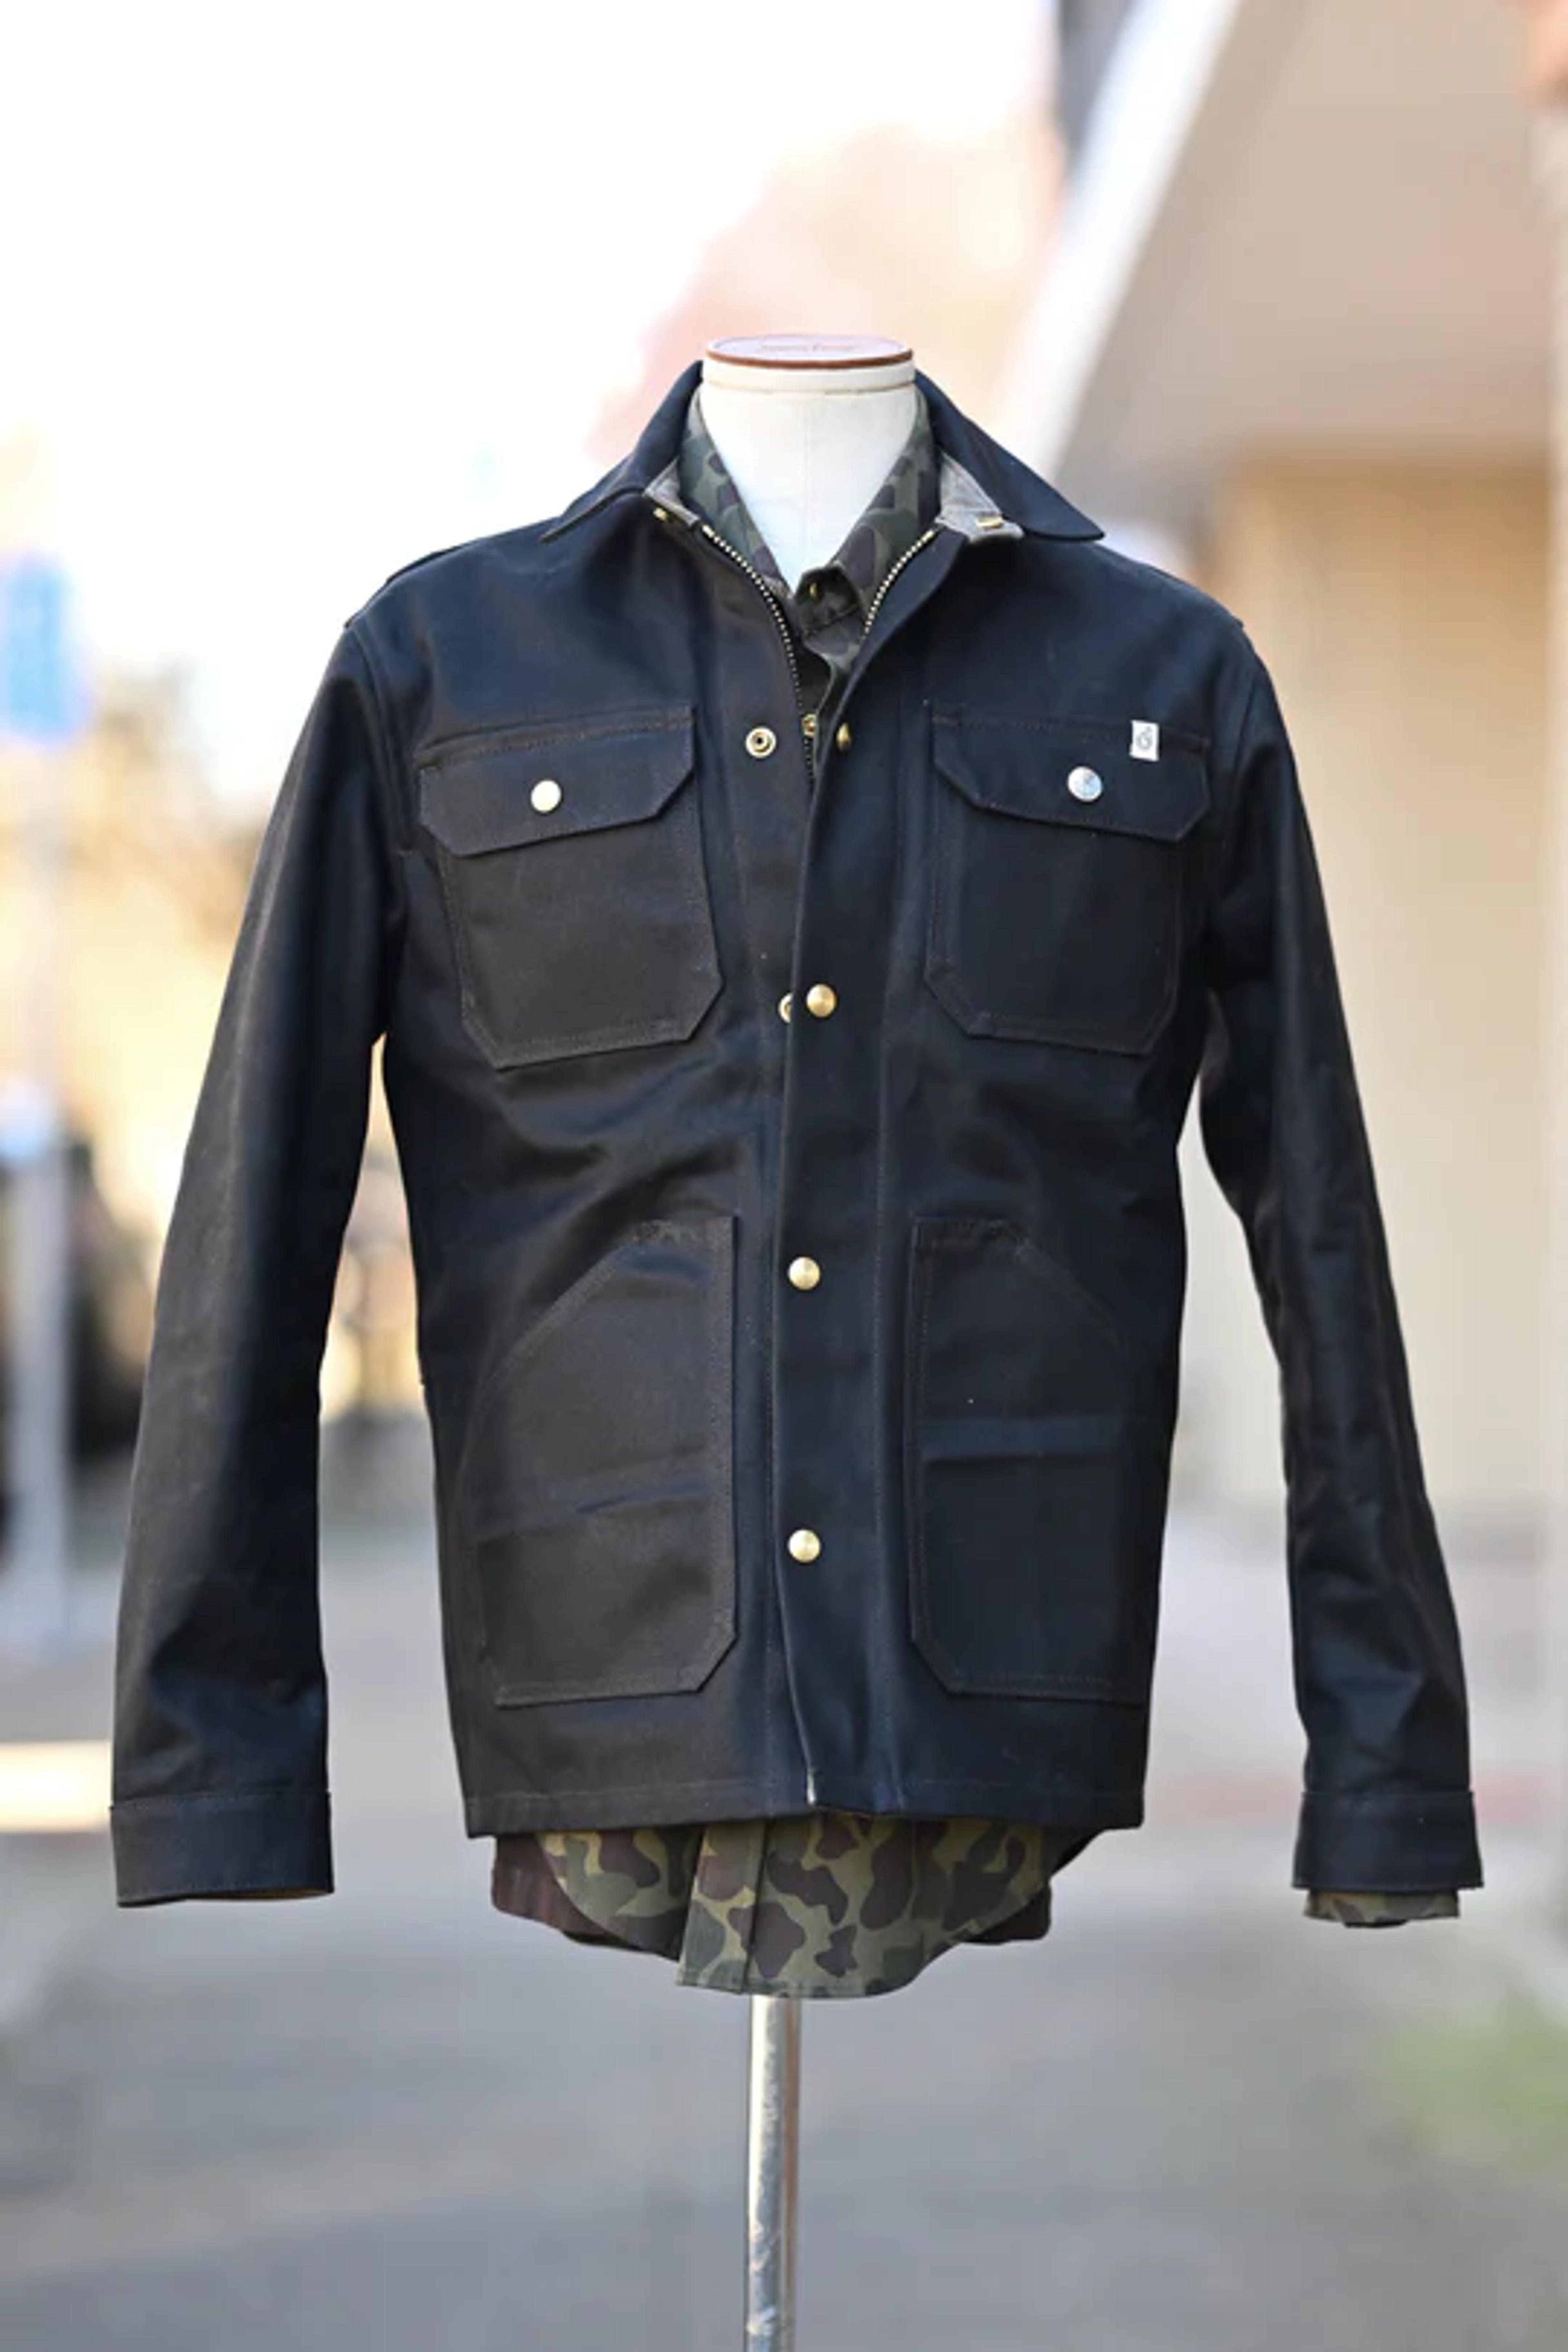 SOLD OUT - The V2 Wills Jacket - 9th Anniversary Special Black Finish – Ship John